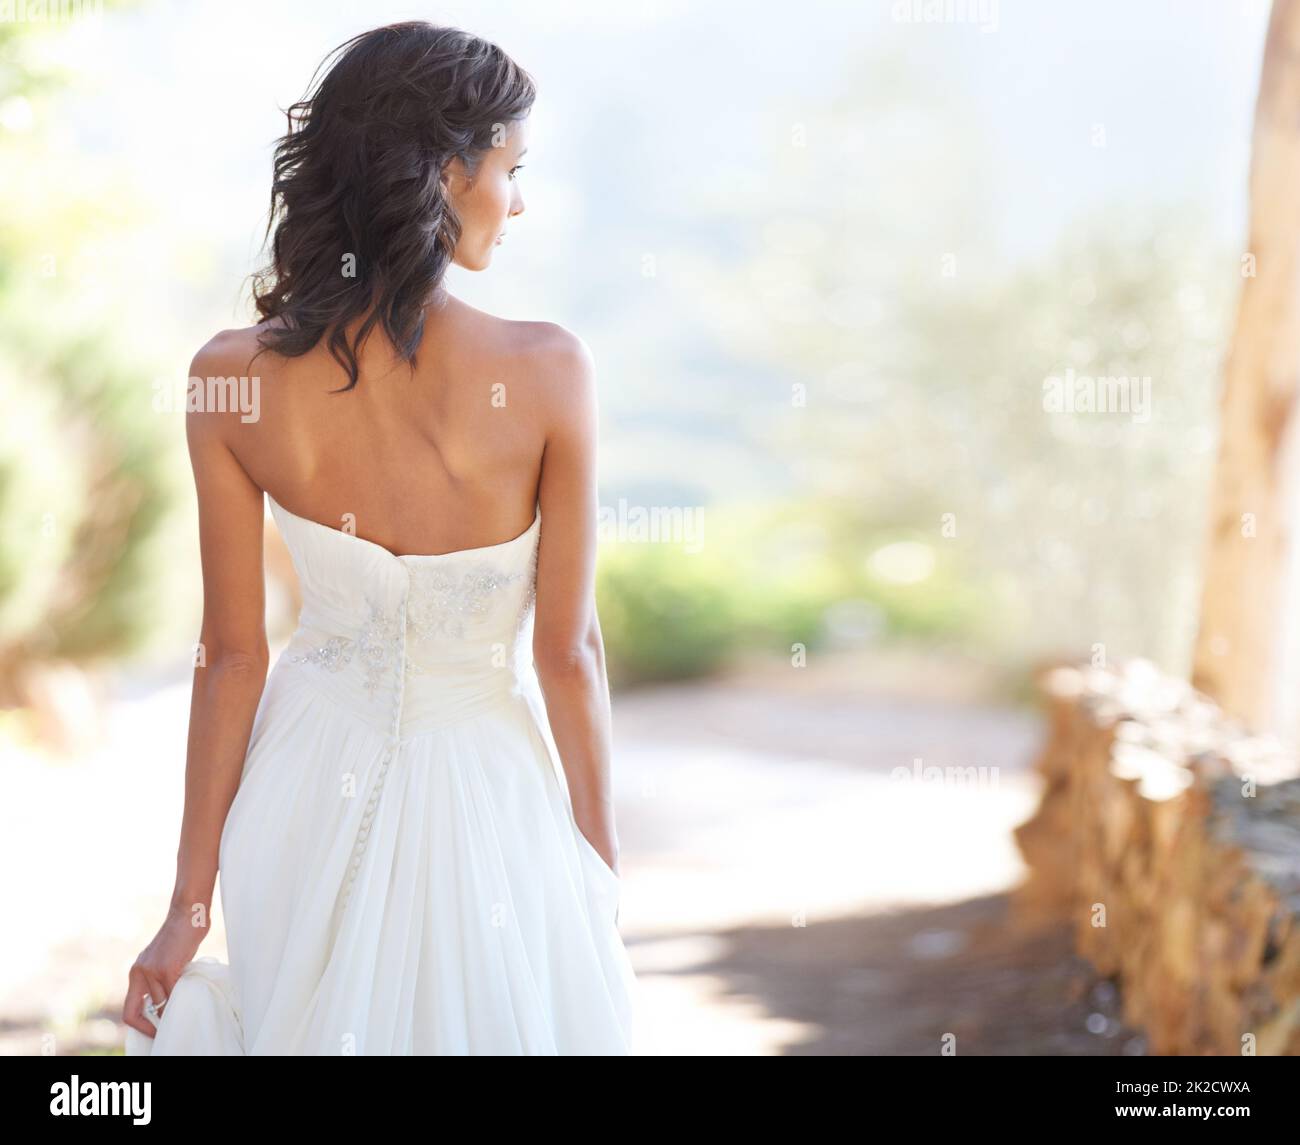 Walking proudly towards the future. A young bride looking to the side while walking down a path outside. Stock Photo